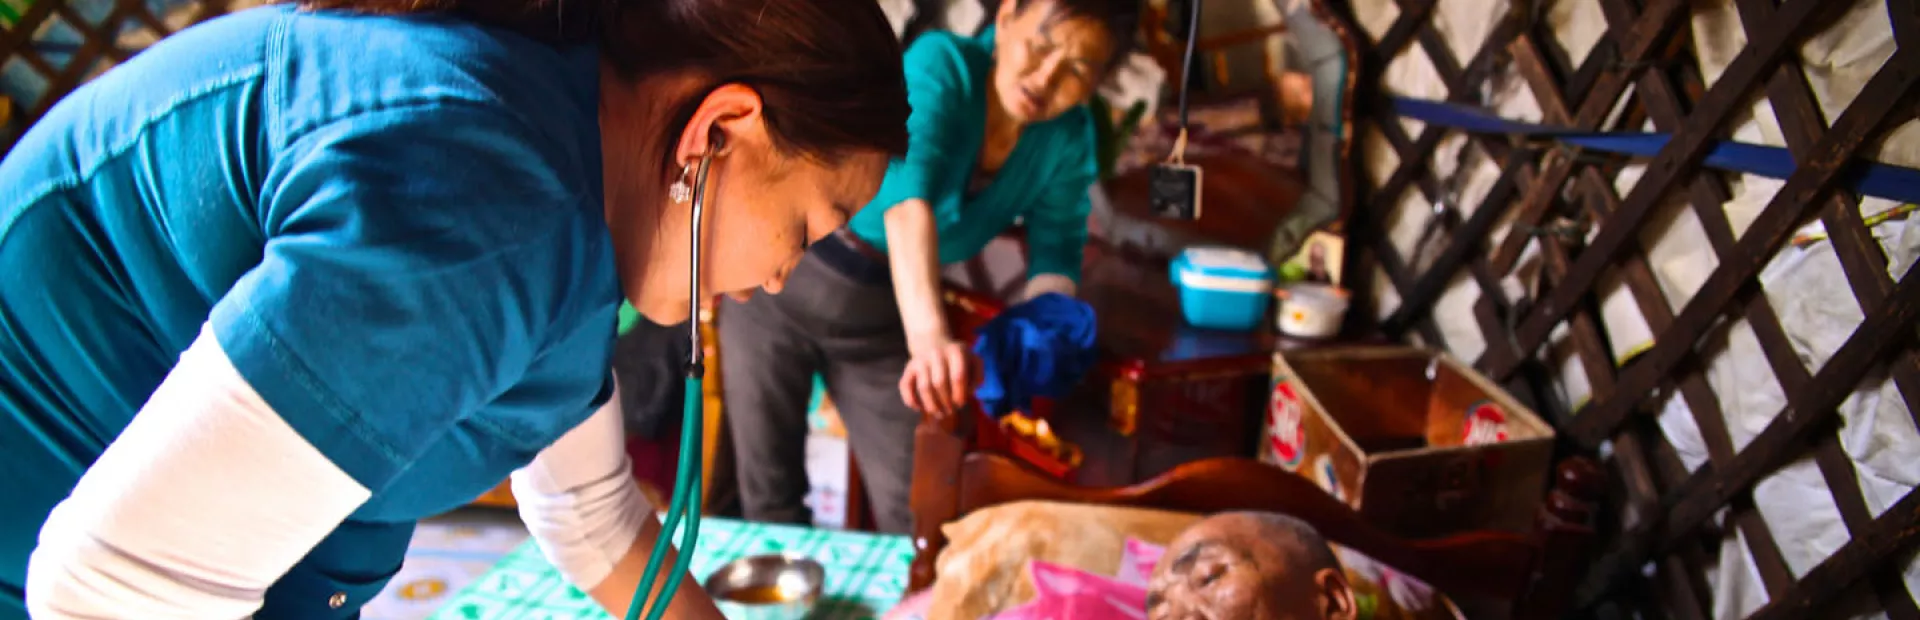 Female health care worker with stethoscope caring for an elderly patient at his home in Ulaanbaatar